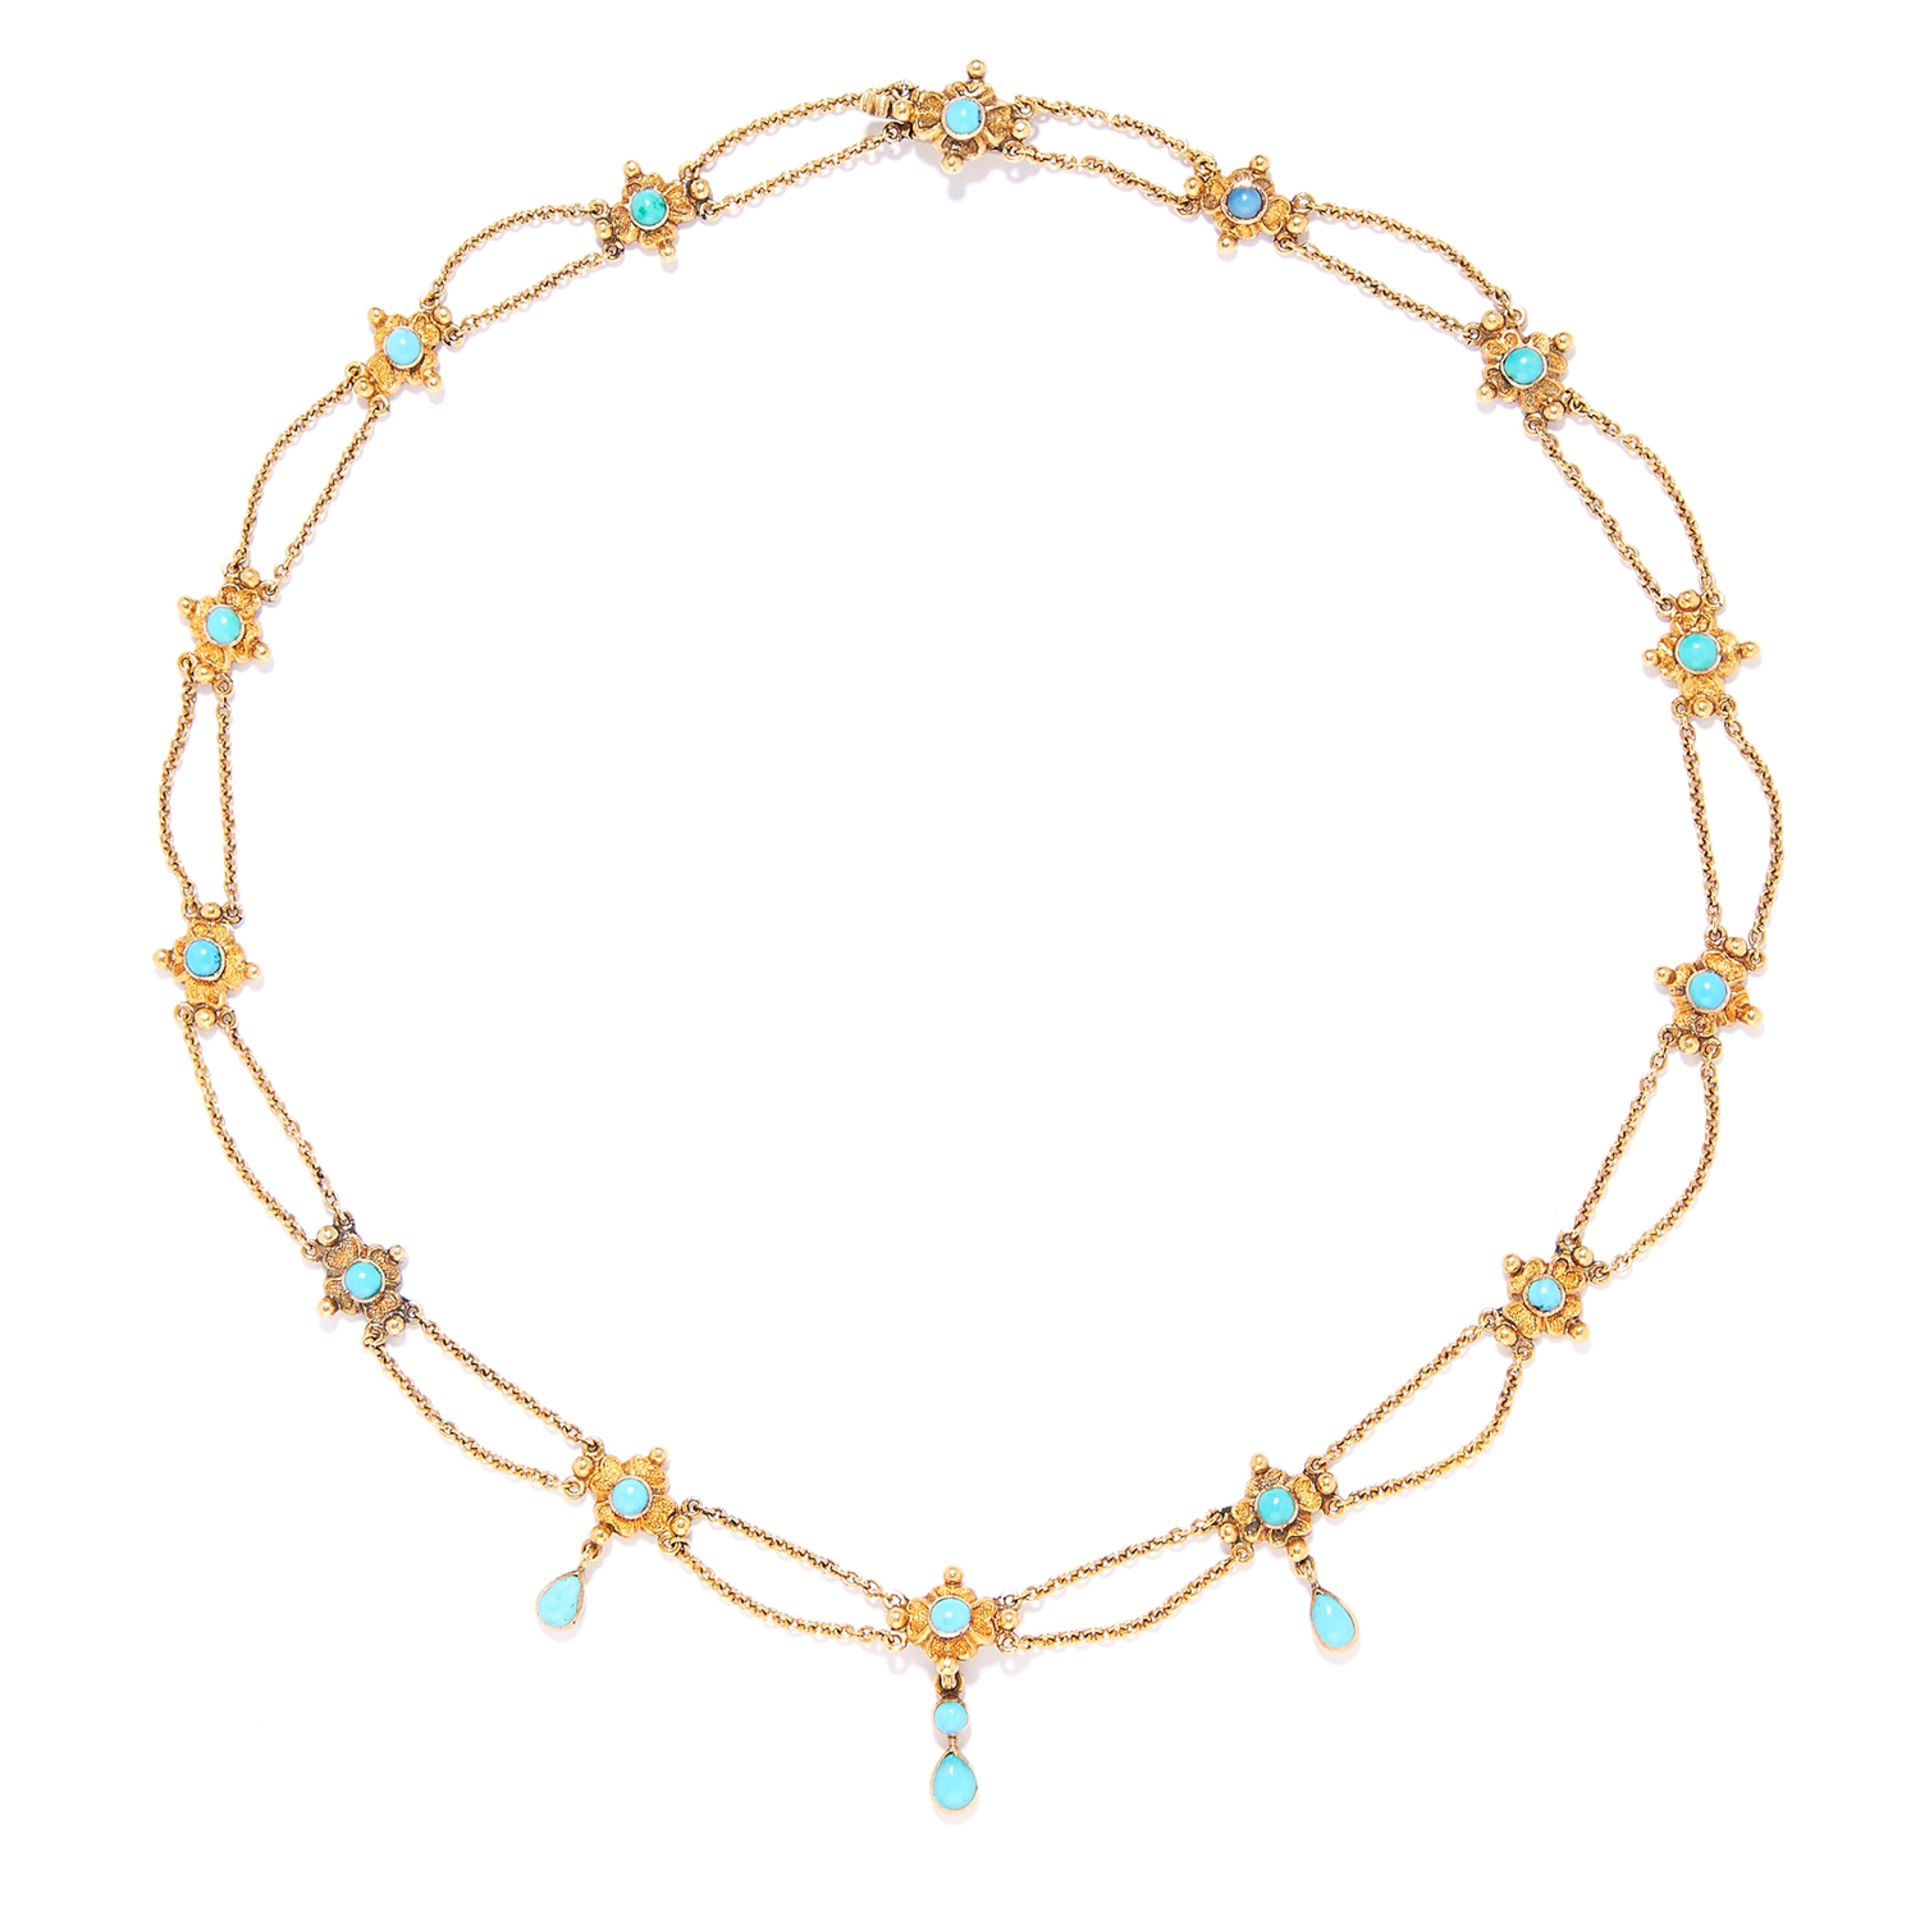 ANTIQUE TURQUOISE NECKLACE in high carat yellow gold, set with fourteen turquoise links between a